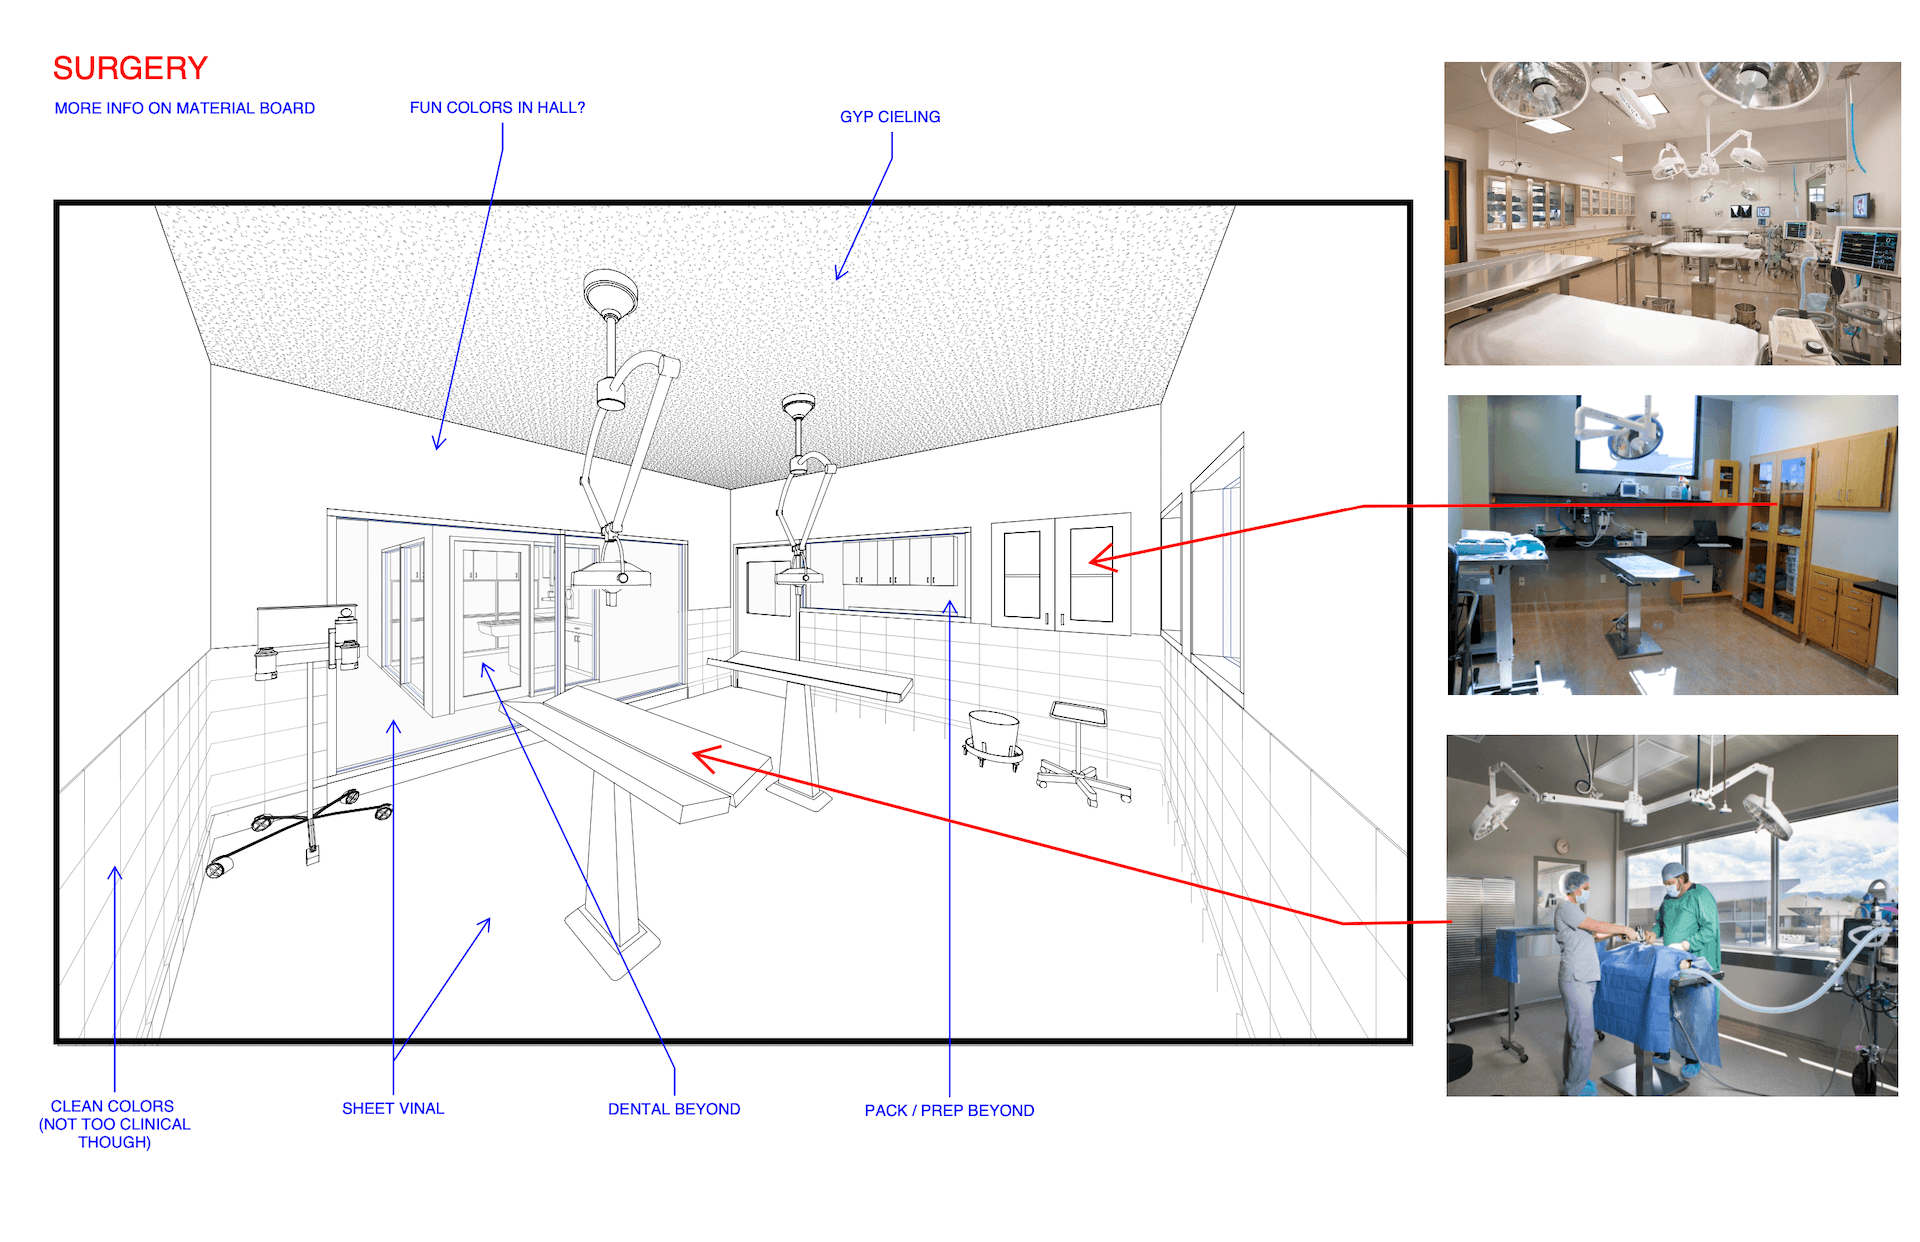 Visual Reference for Interior 3D Visualization of Surgery Room